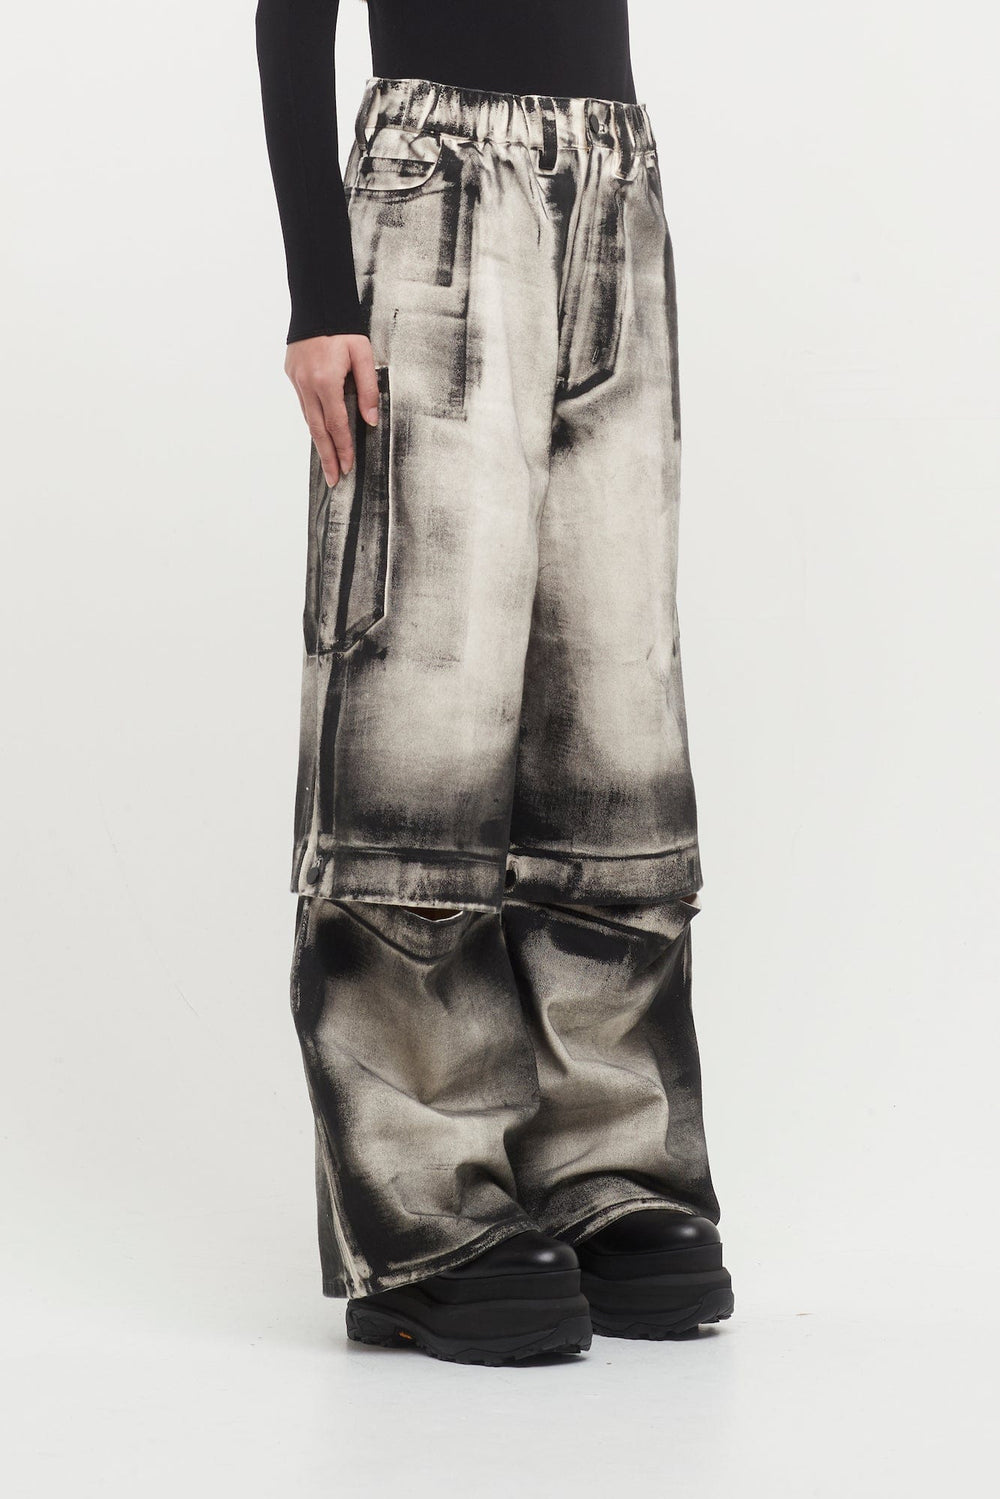 Melitta Baumeister Painted Denim Pants – Antidote Fashion and